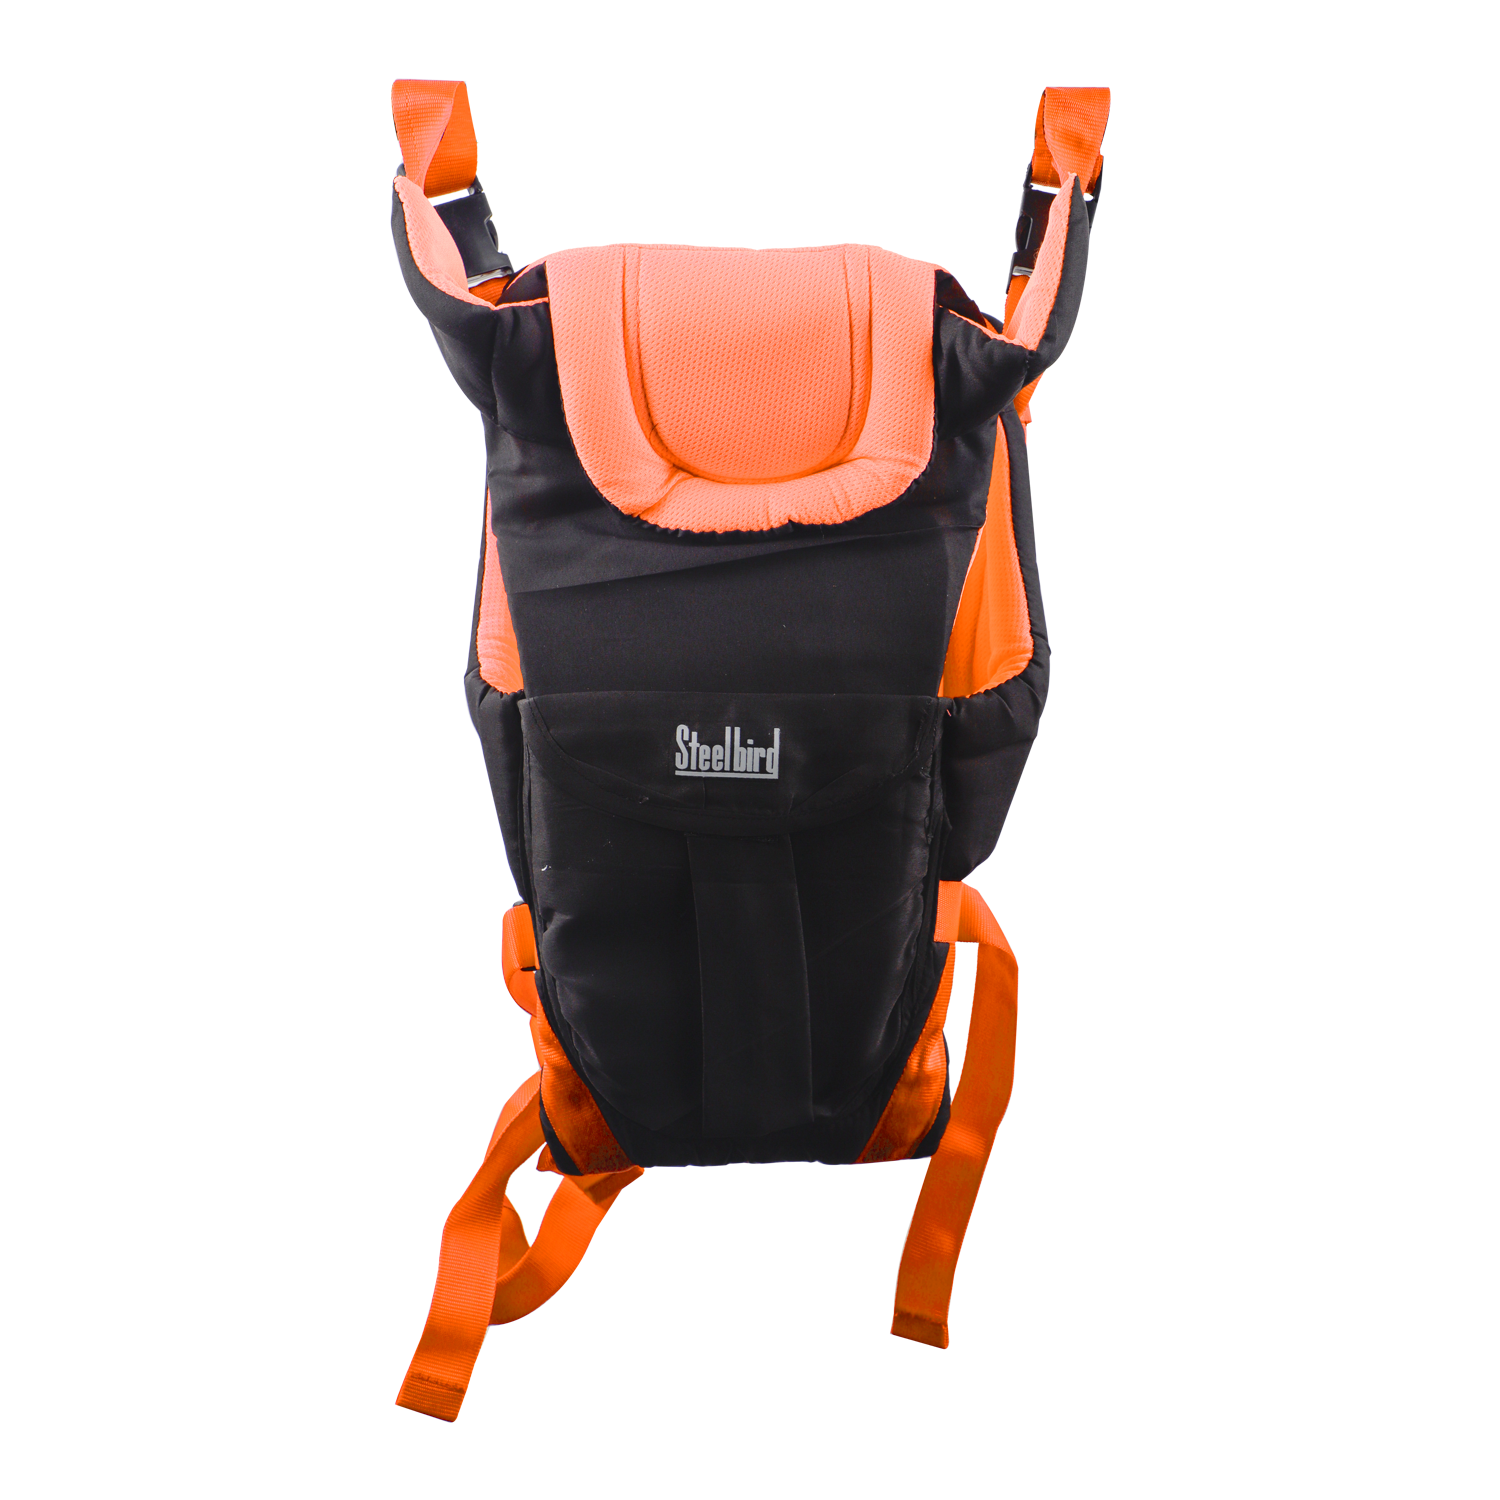 Steelbird Super Four Kids 4-in-1 Adjustable Baby Carrier Cum Kangaroo Bag-Lightweight And Breathable-Back-Front Carrier For Baby With Safety Belt-Max Weight Up To 12 Kg (Orange Black)